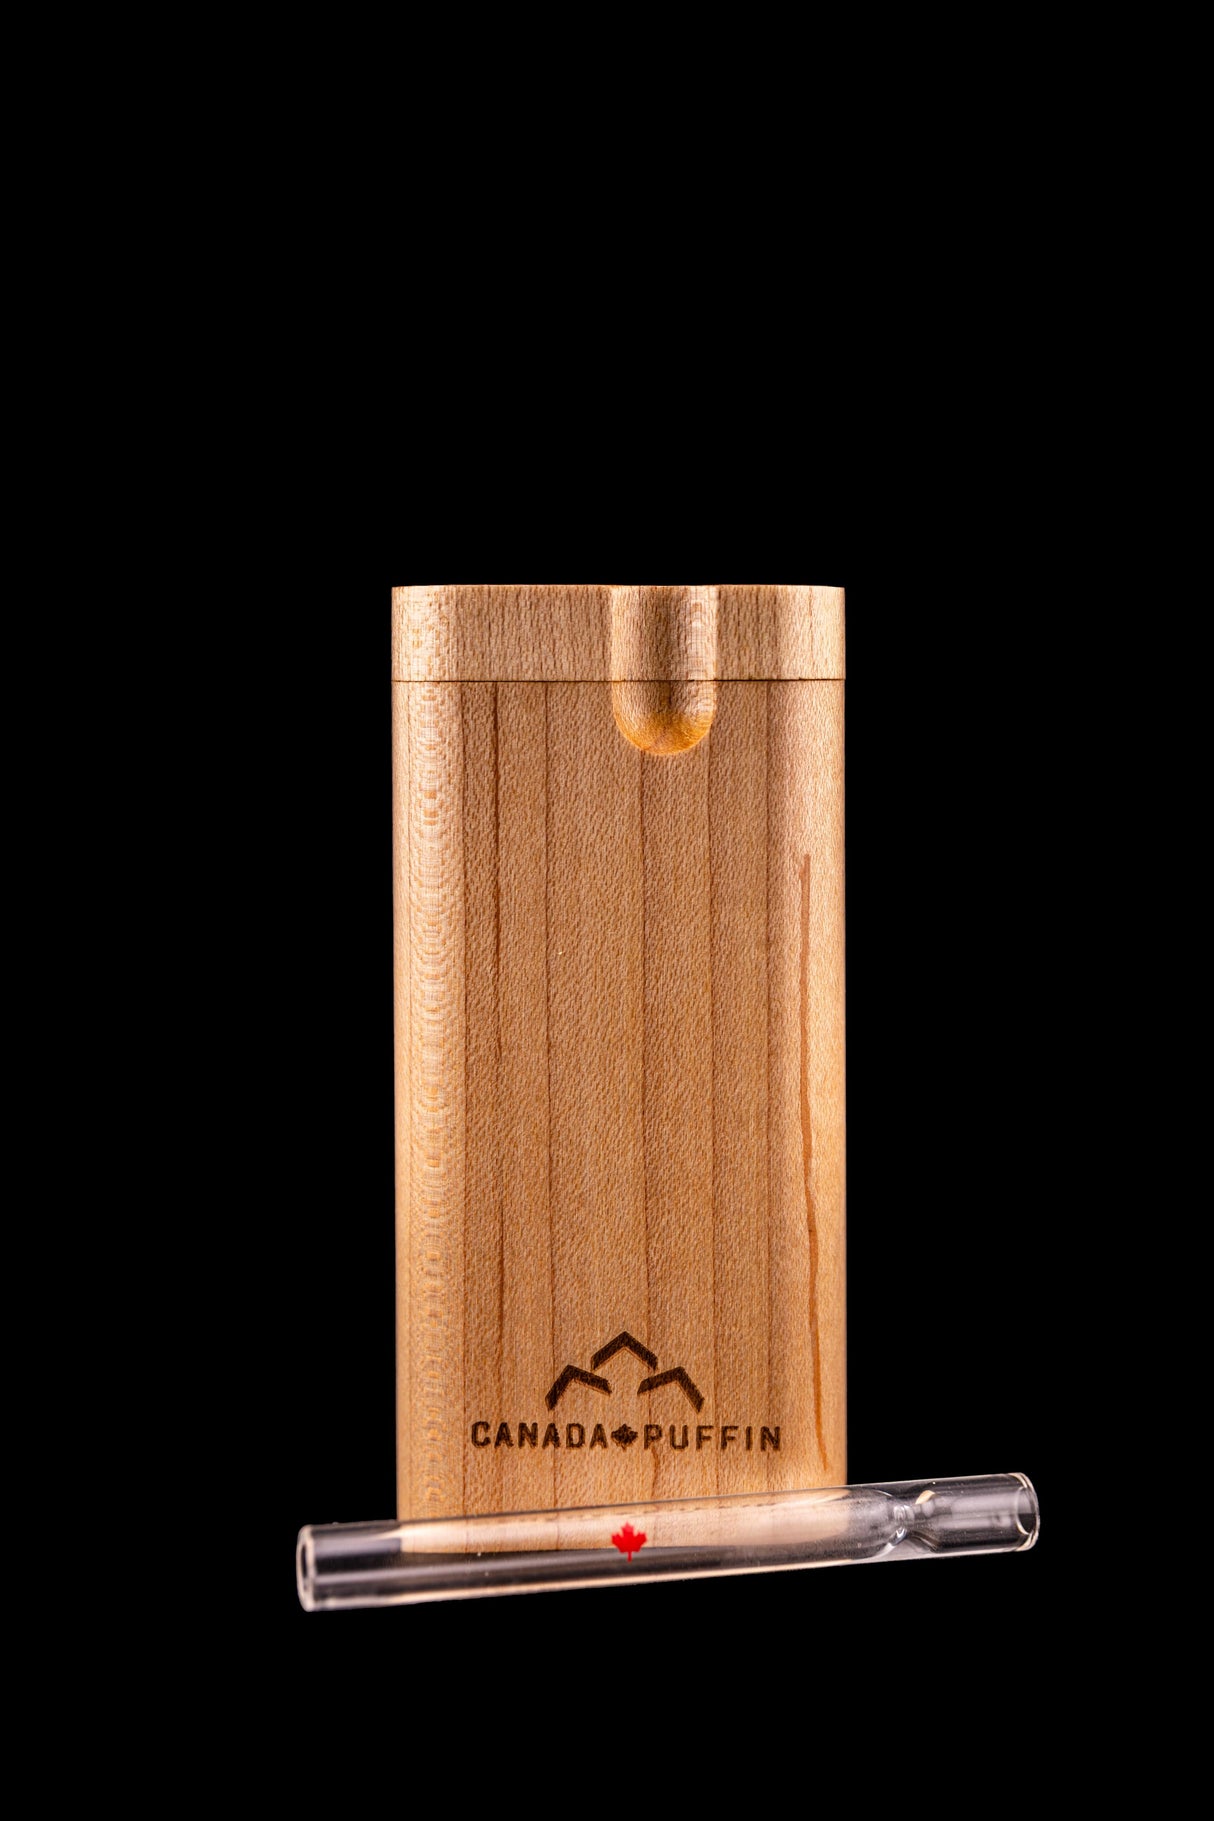 Canada Puffin Banff Dugout and One Hitter set, front view on a black background